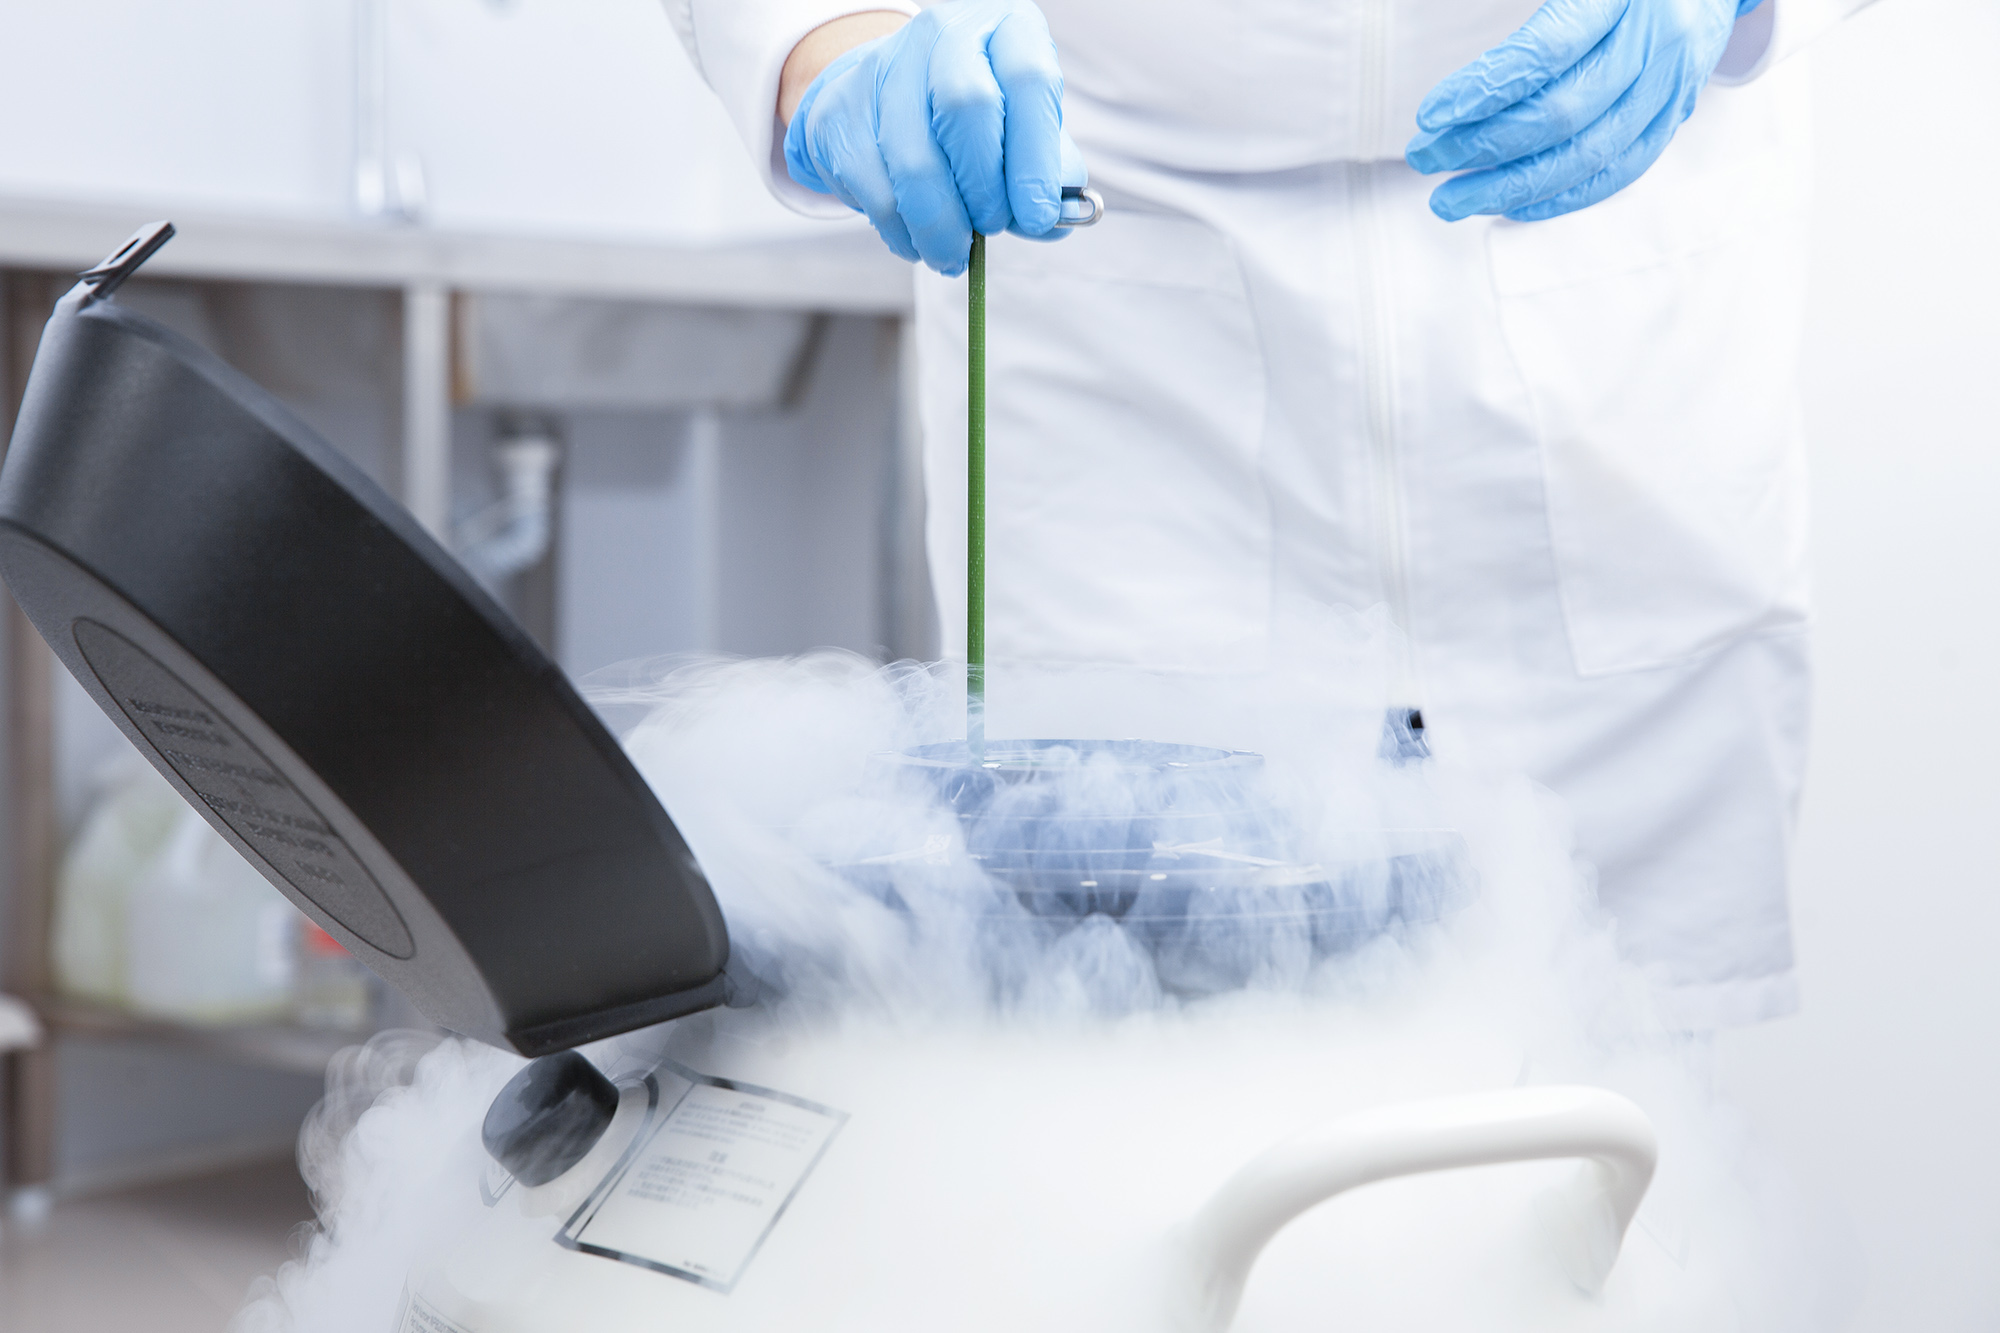 Medical Professional pulling something from a cryogenic tank while smoke comes flowing out